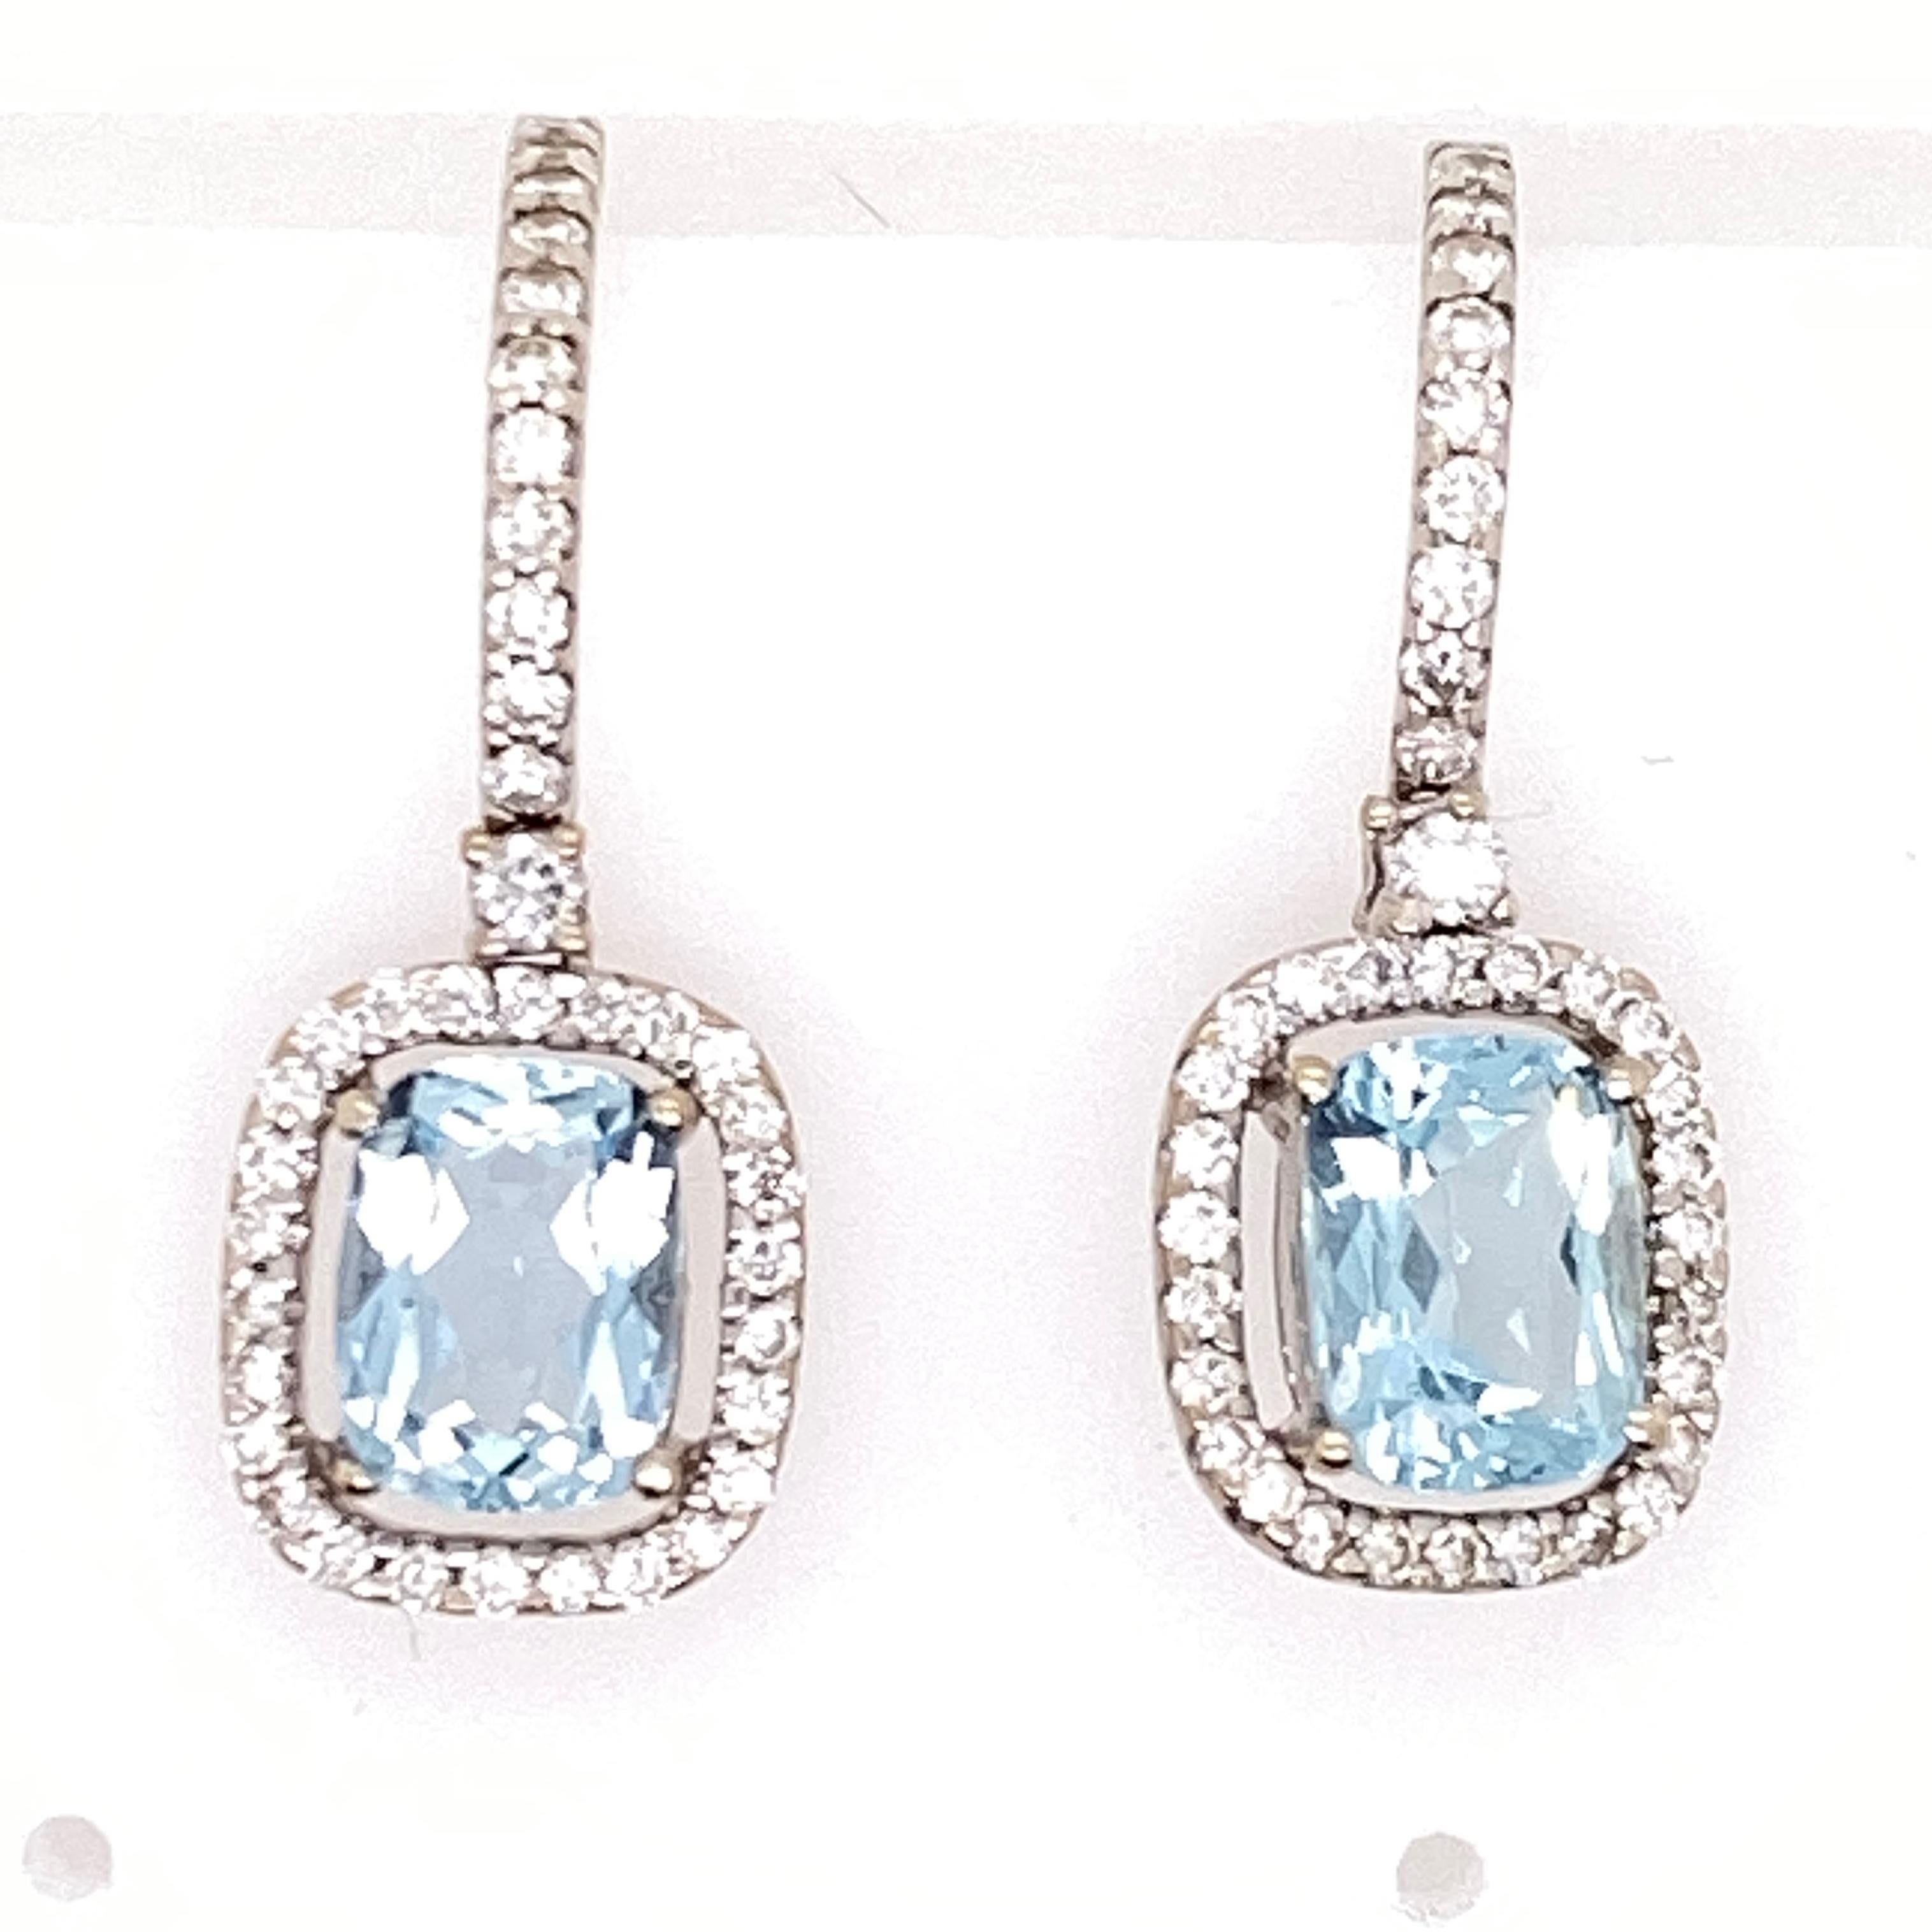 Aquamarine diamond drop earrings fashioned in 14 karat white gold. The two cushion cut aquamarine gemstones (1.50 CTW) are surrounded by 74 round brilliant cut white diamonds (.50 CTW). The earrings measure 1.0 inch in length and .40 inches in